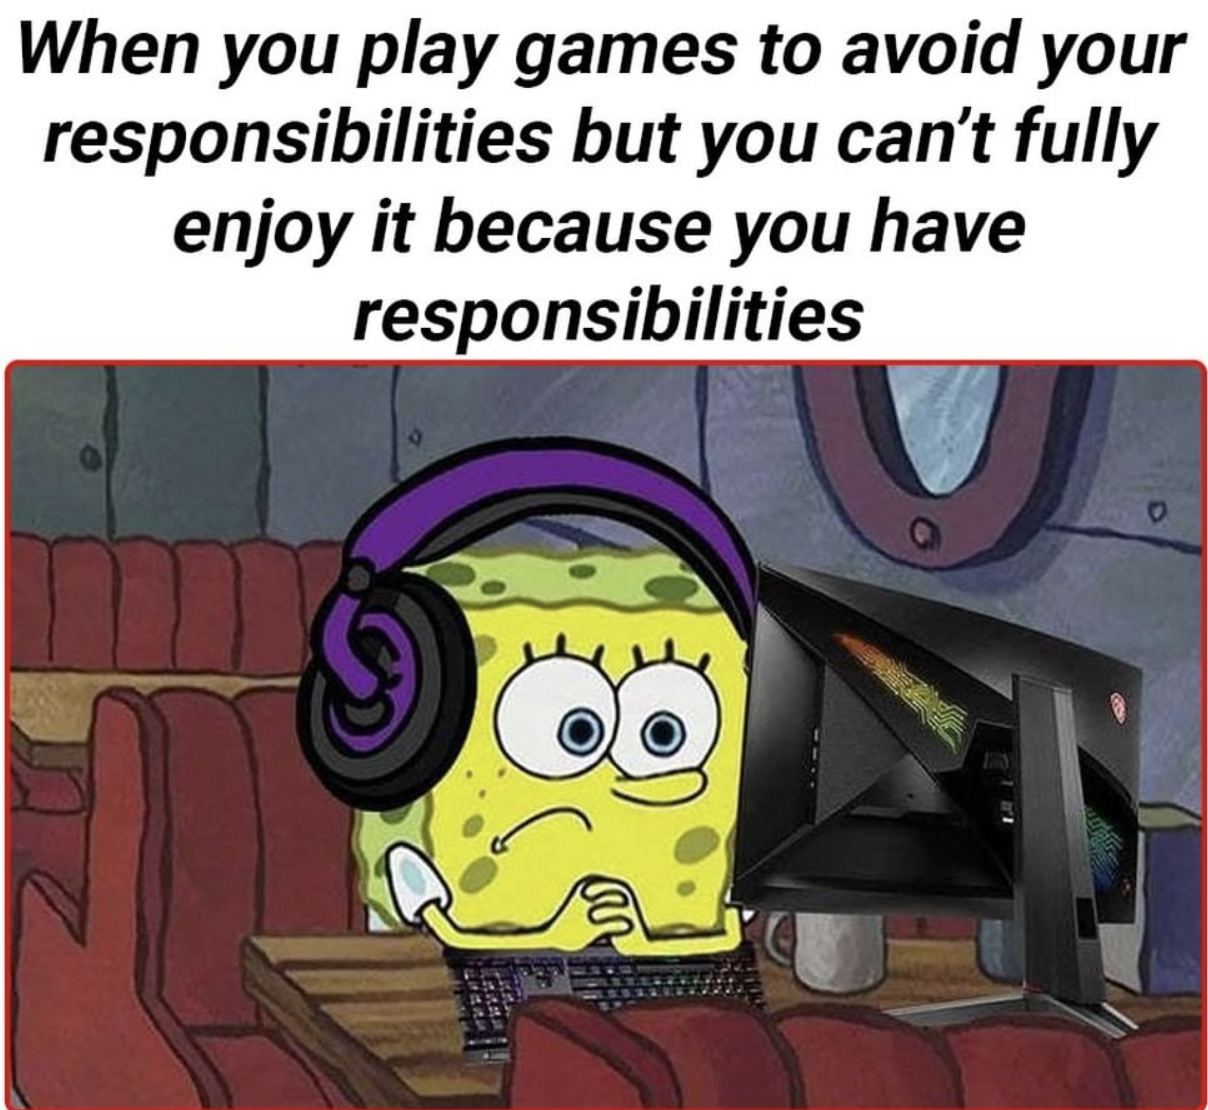 Gaming memes - When you play games to avoid your responsibilities but you can't fully enjoy it because you have responsibilities